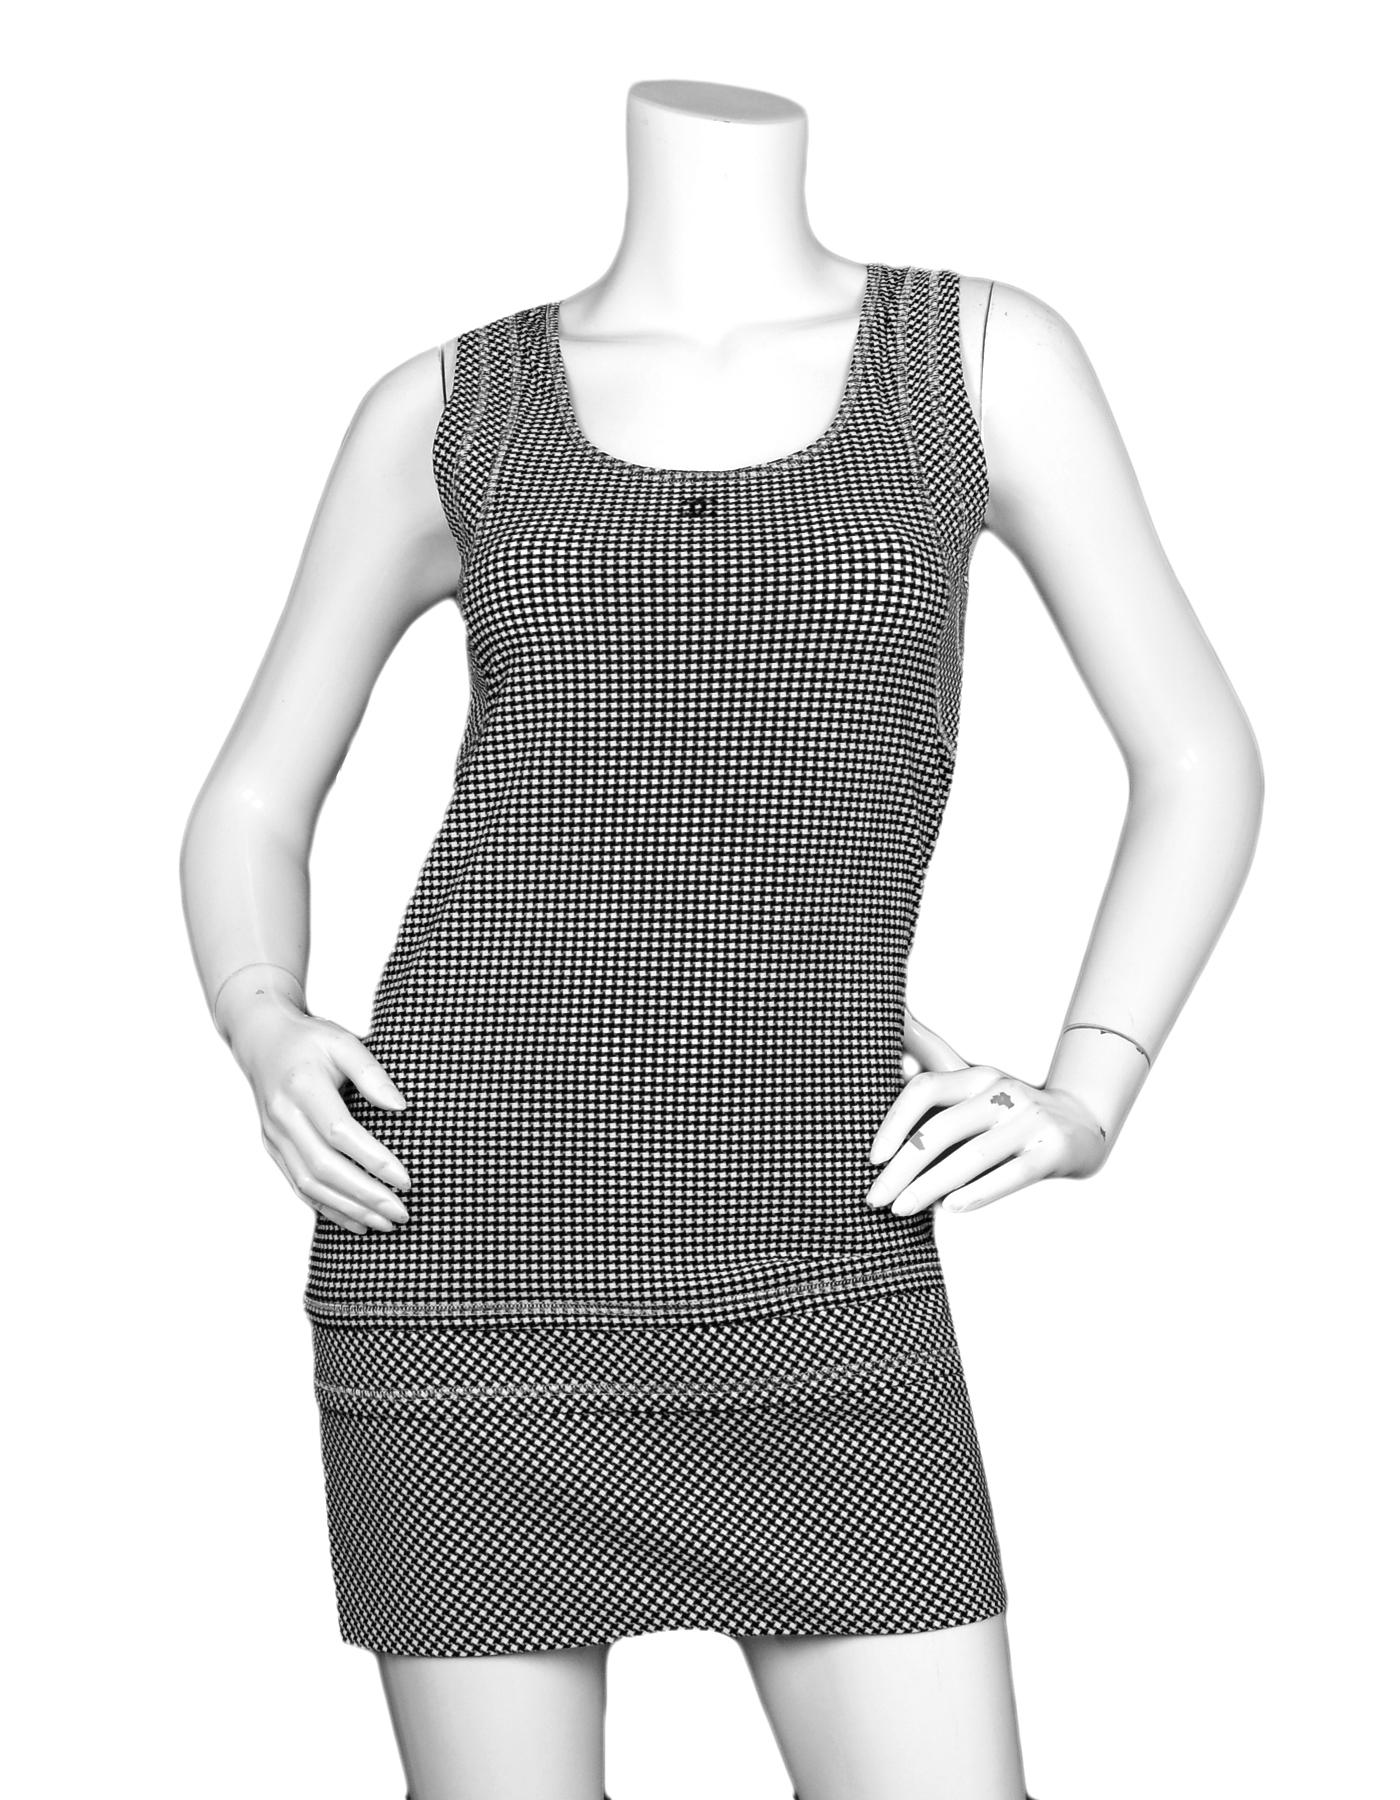 Chanel Black/White Houndstooth Sleeveless Dress sz 38

Made In: France
Year of Production: 2008
Color: Black/White
Materials: 86% Nylon, 14% Spandex
Lining: 86% Nylon, 14% Spandex
Opening/Closure: Slip-on
Overall Condition: Excellent pre-owned